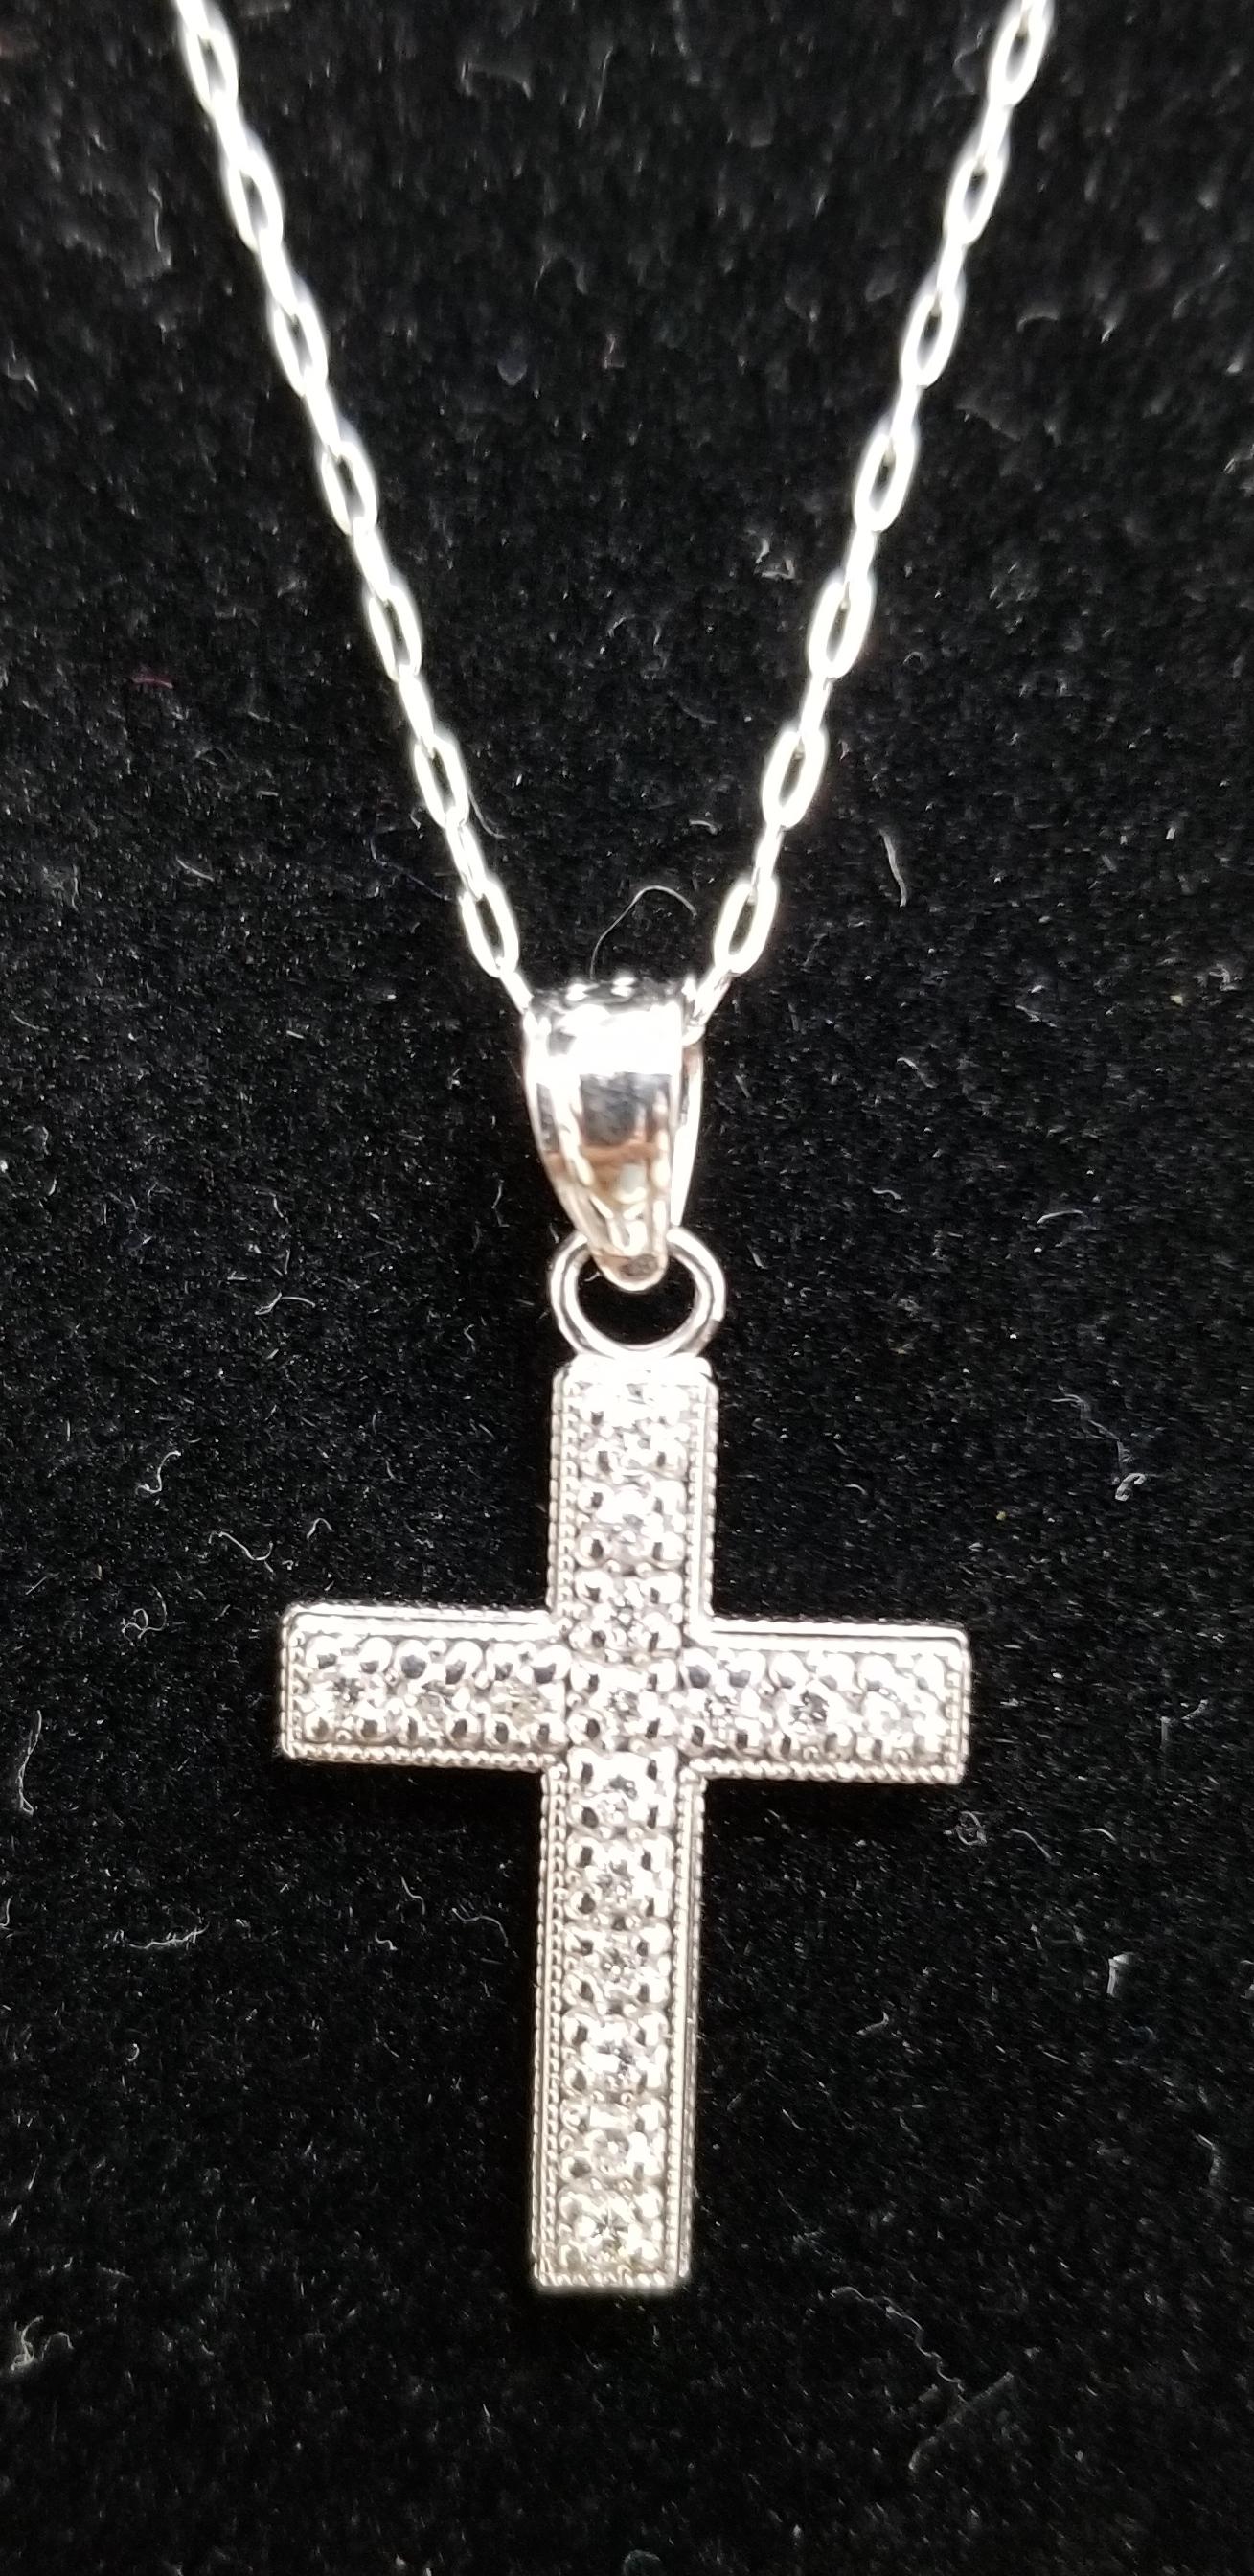 14k white gold diamond cross with 16 round full cut diamonds weighing .15pts. of nice quality on a 16 inch link chain.